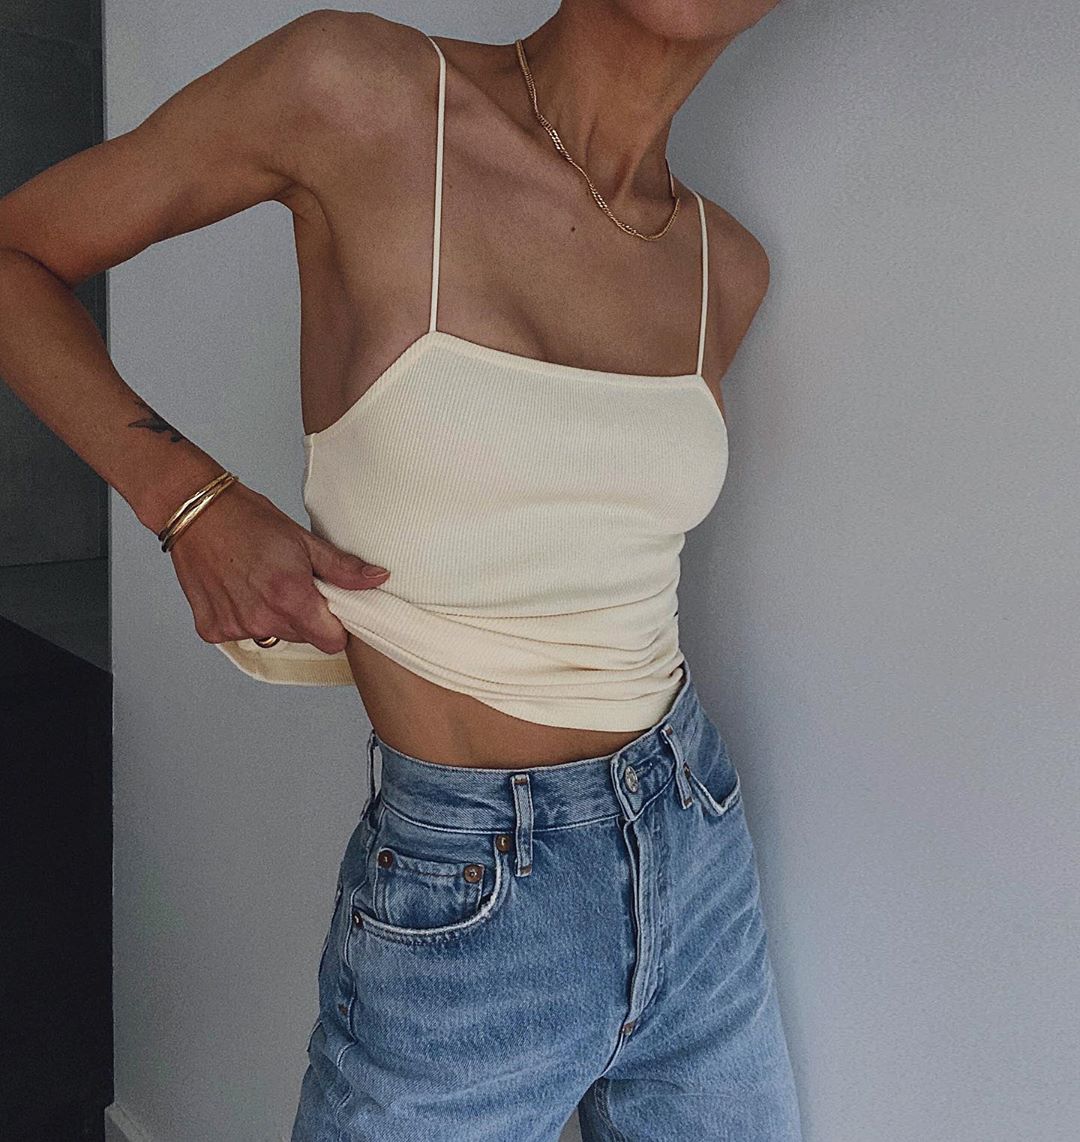 I Haven’t Worn a Bra in Years—Here’s What I Wear Instead